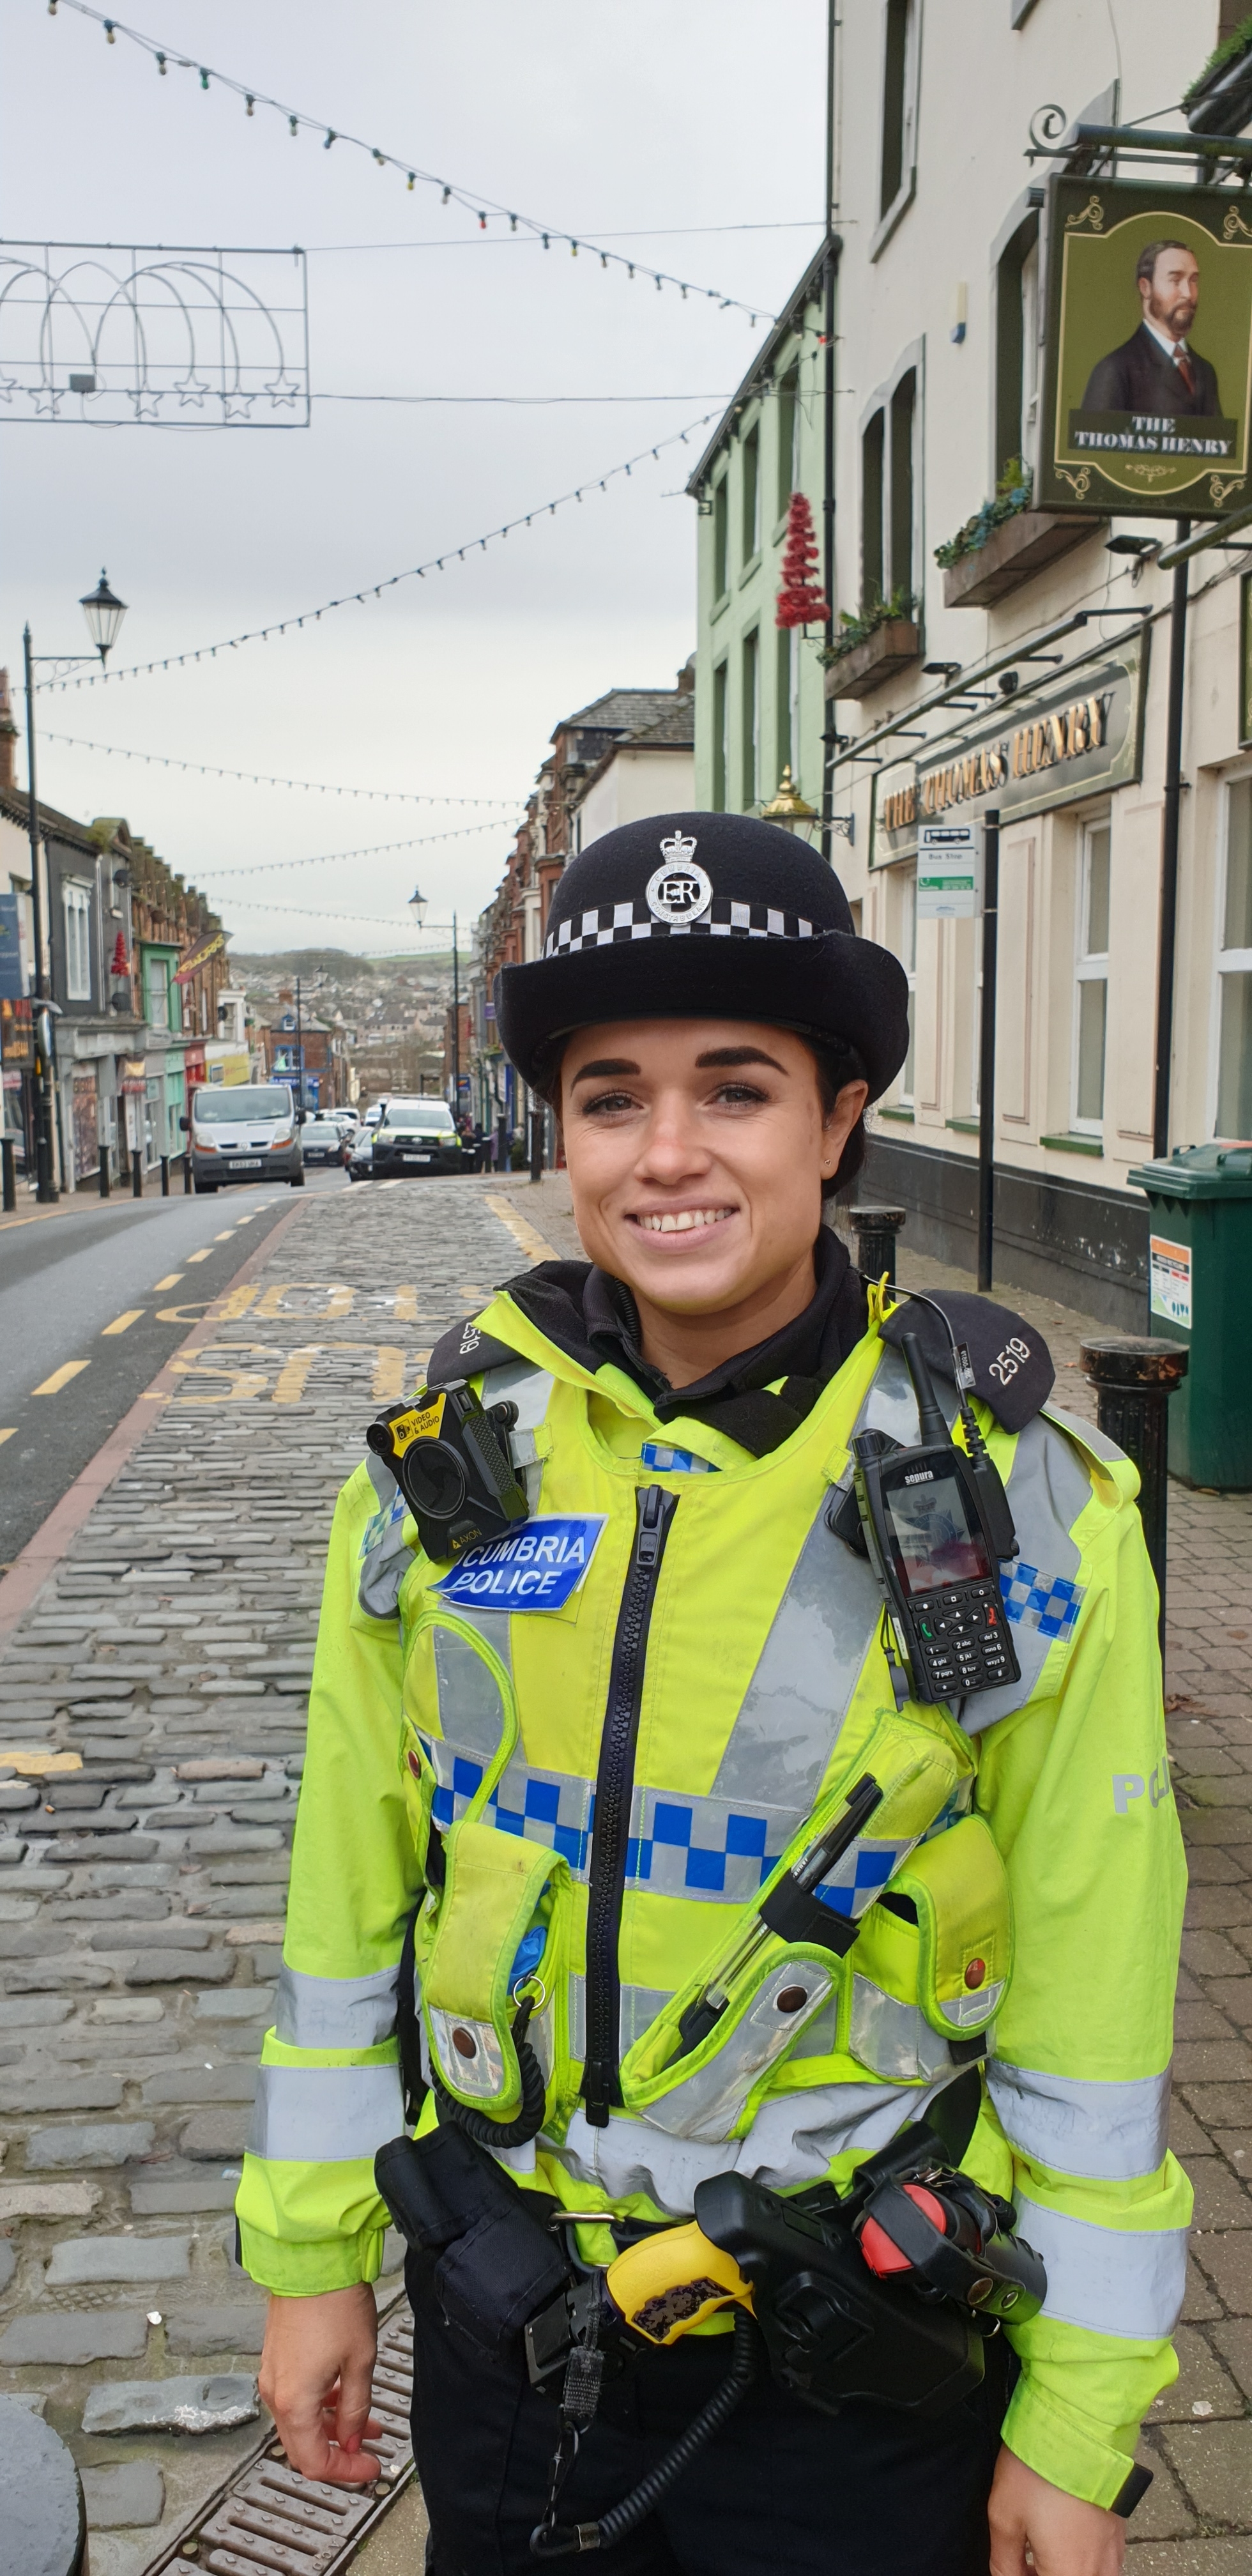 Community Beat Officer Stacy Hucker. Pic: Cumbria Police